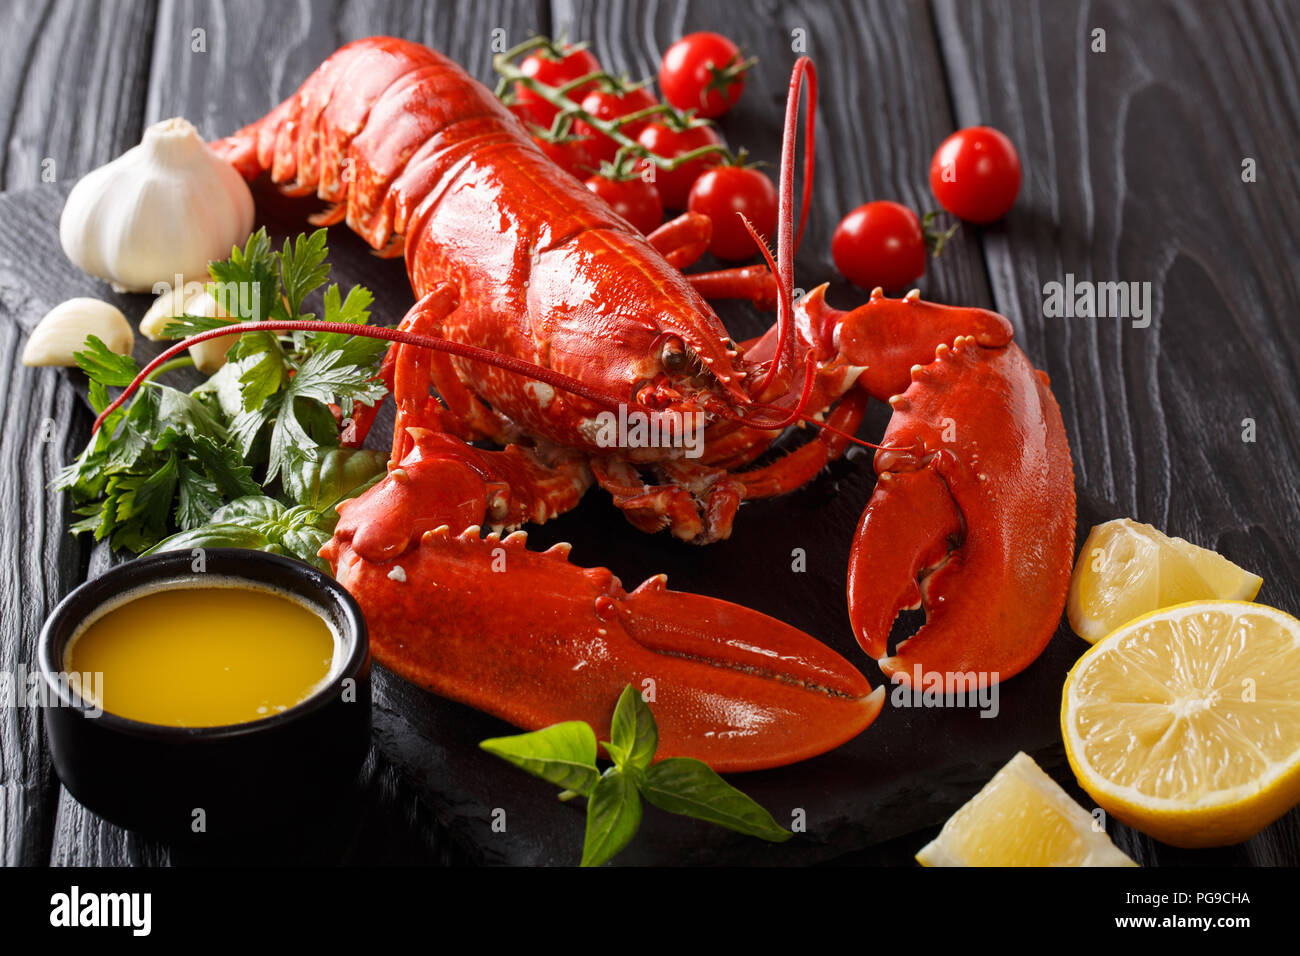 Shellfish plate of crustacean seafood with fresh boiled lobster with vegetables and herbs. gourmet dinner background. horizontal Stock Photo